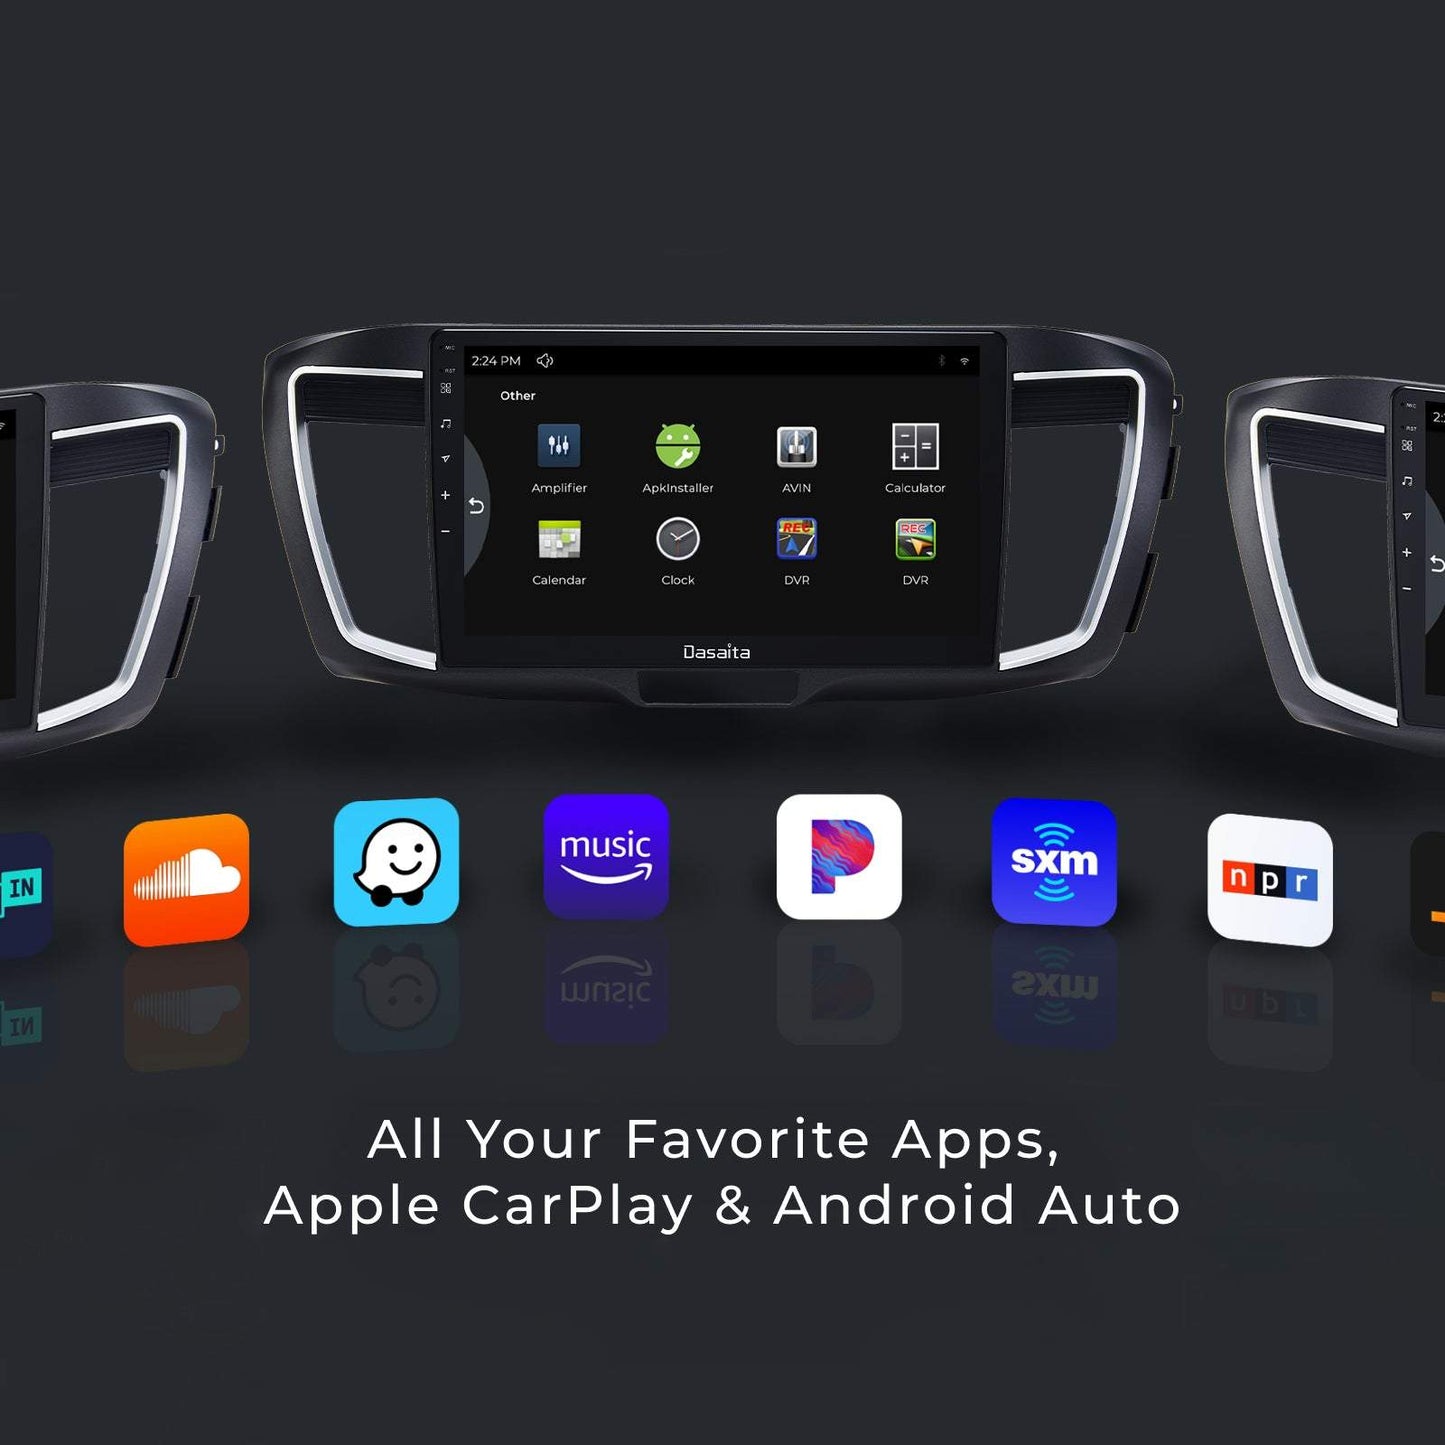 Dasaita Scout10 10.2 inch for Honda Accord 2013 2014 2015 2016 2017 Car Android Stereo Apple Carplay Android Auto GPS Navigation Wifi 1280*720 Video